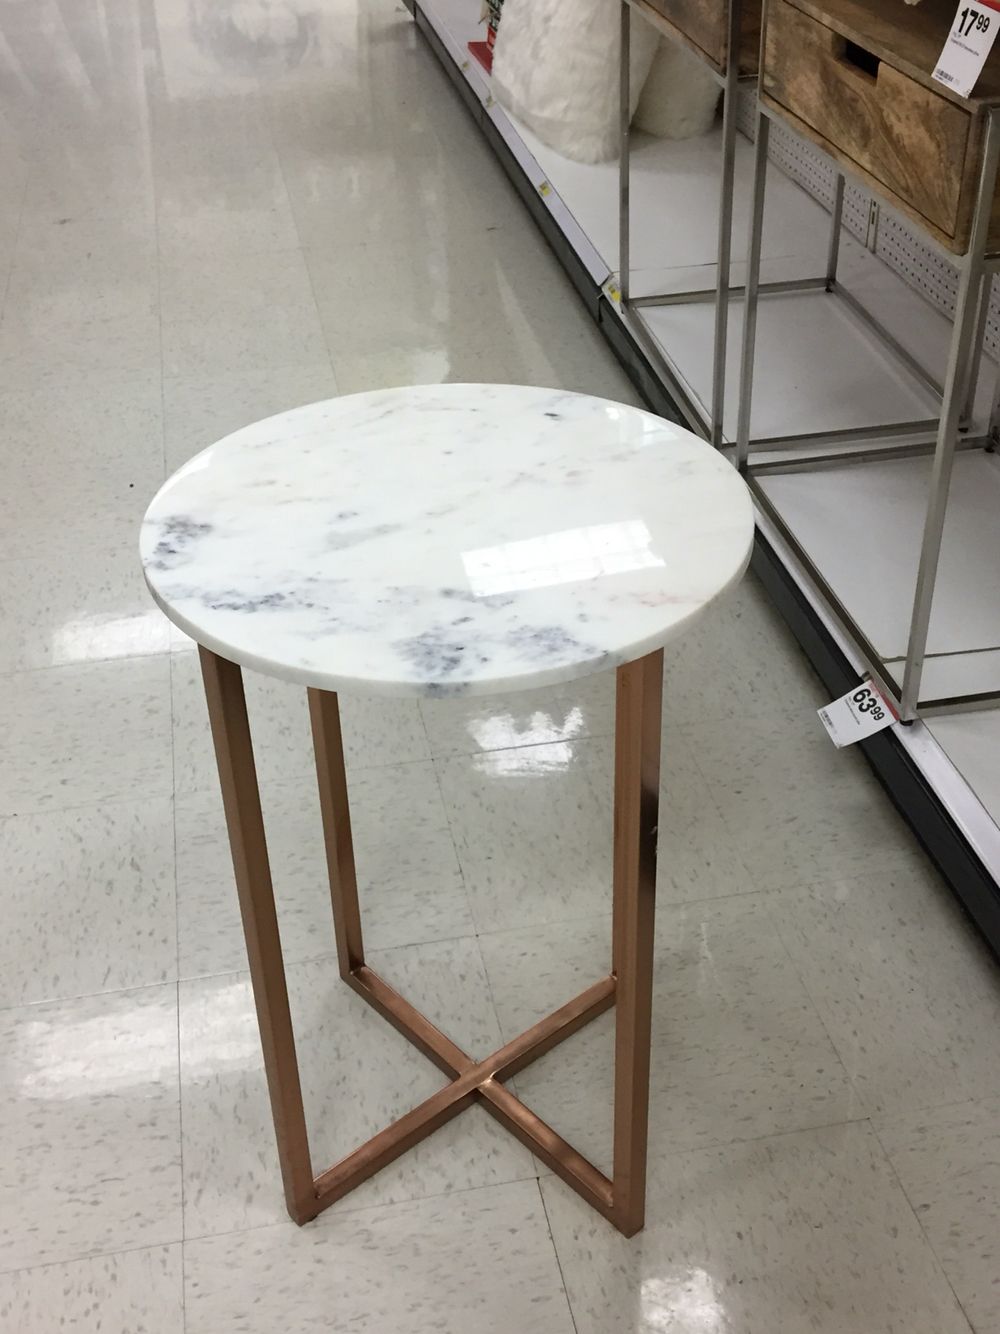 hey people you have pinned this table took ture target pink marble accent the and uploaded board from phone unfortunately haven seen huge wall clock beach decor small half round